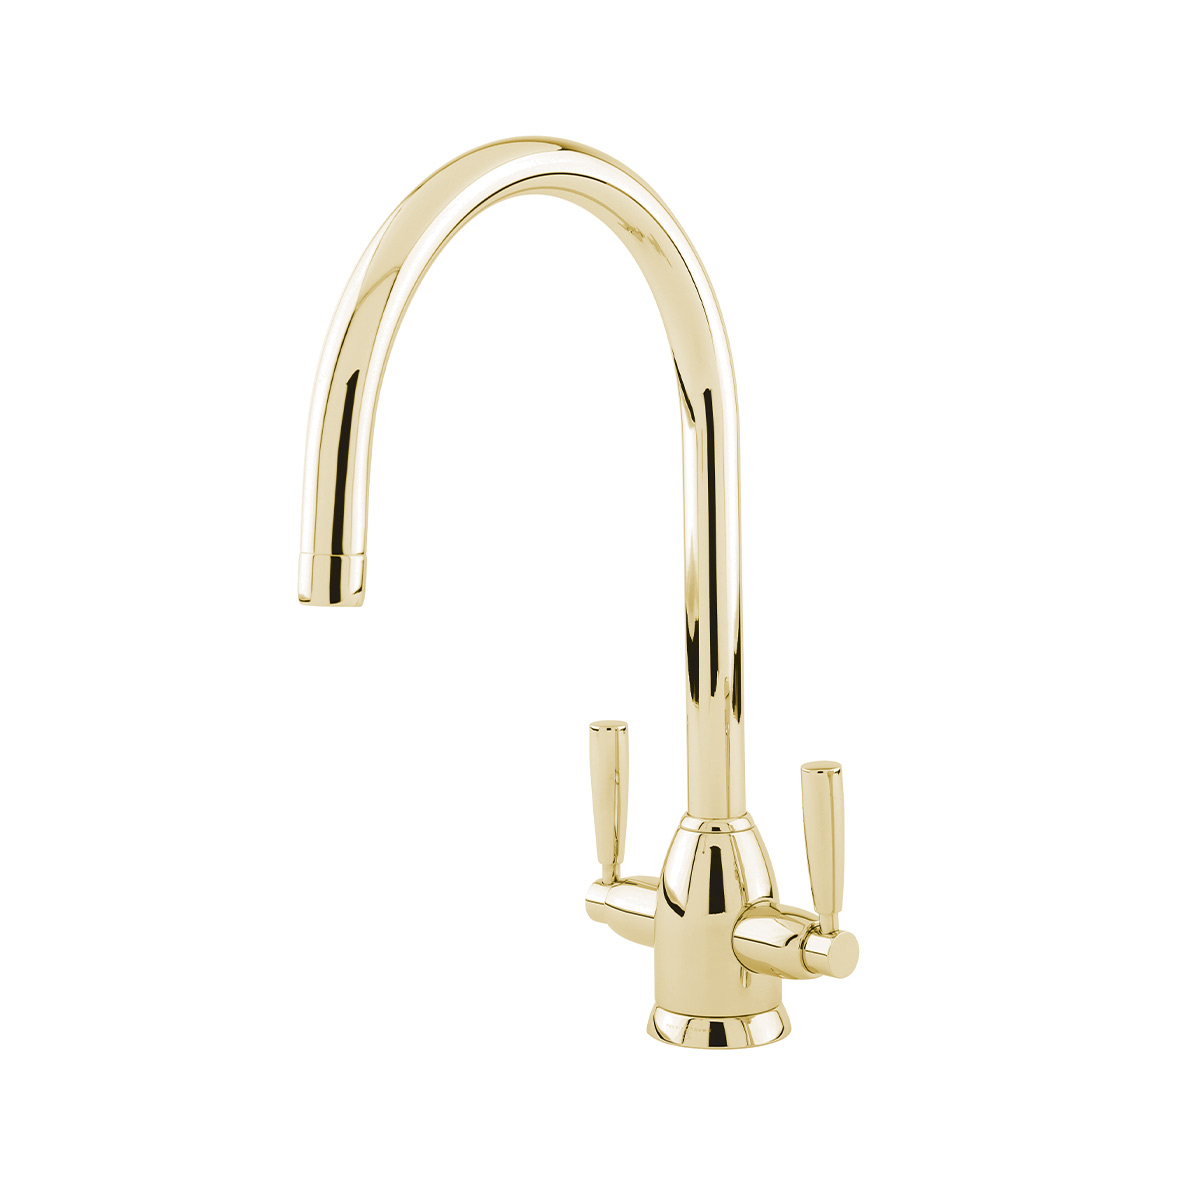 Shaws by Perrin & Rowe Silverdale kitchen mixer in Gold. Oberon style kitchen mixer AUSH.4861. Distributed in Australia by Luxe by Design, Brisbane.